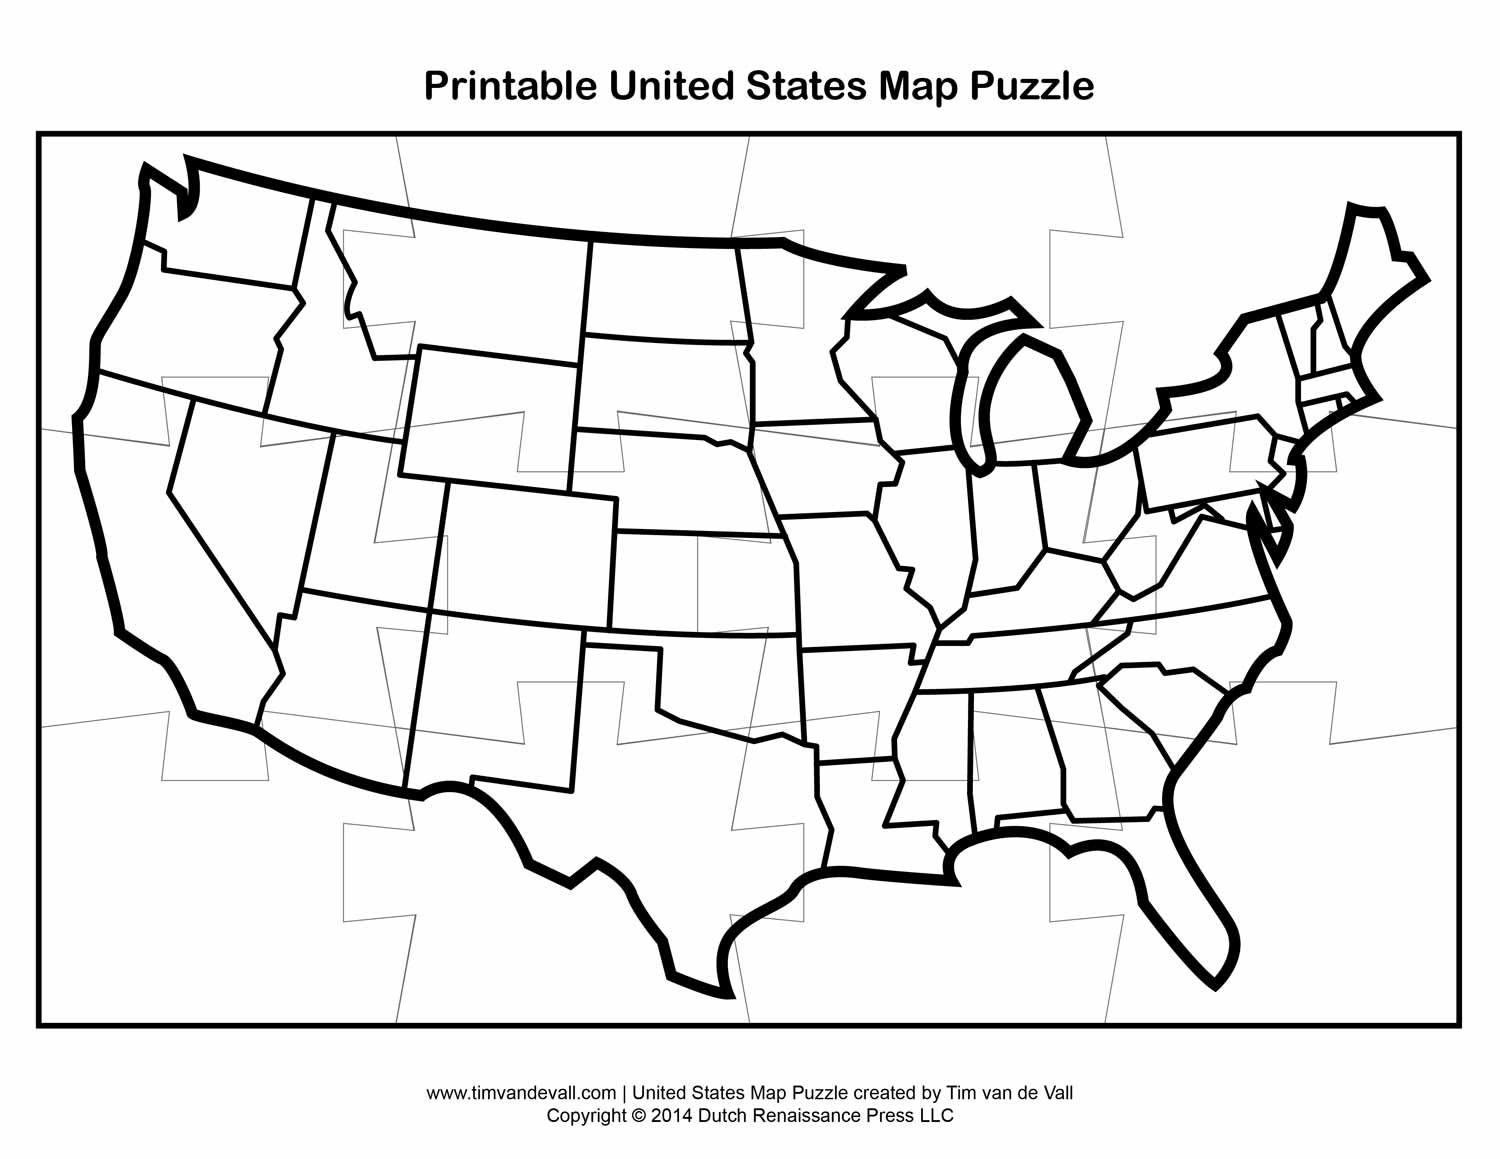 Coloring Pages : Large Printable World Map Pdf Download Them Or - Large Printable Maps